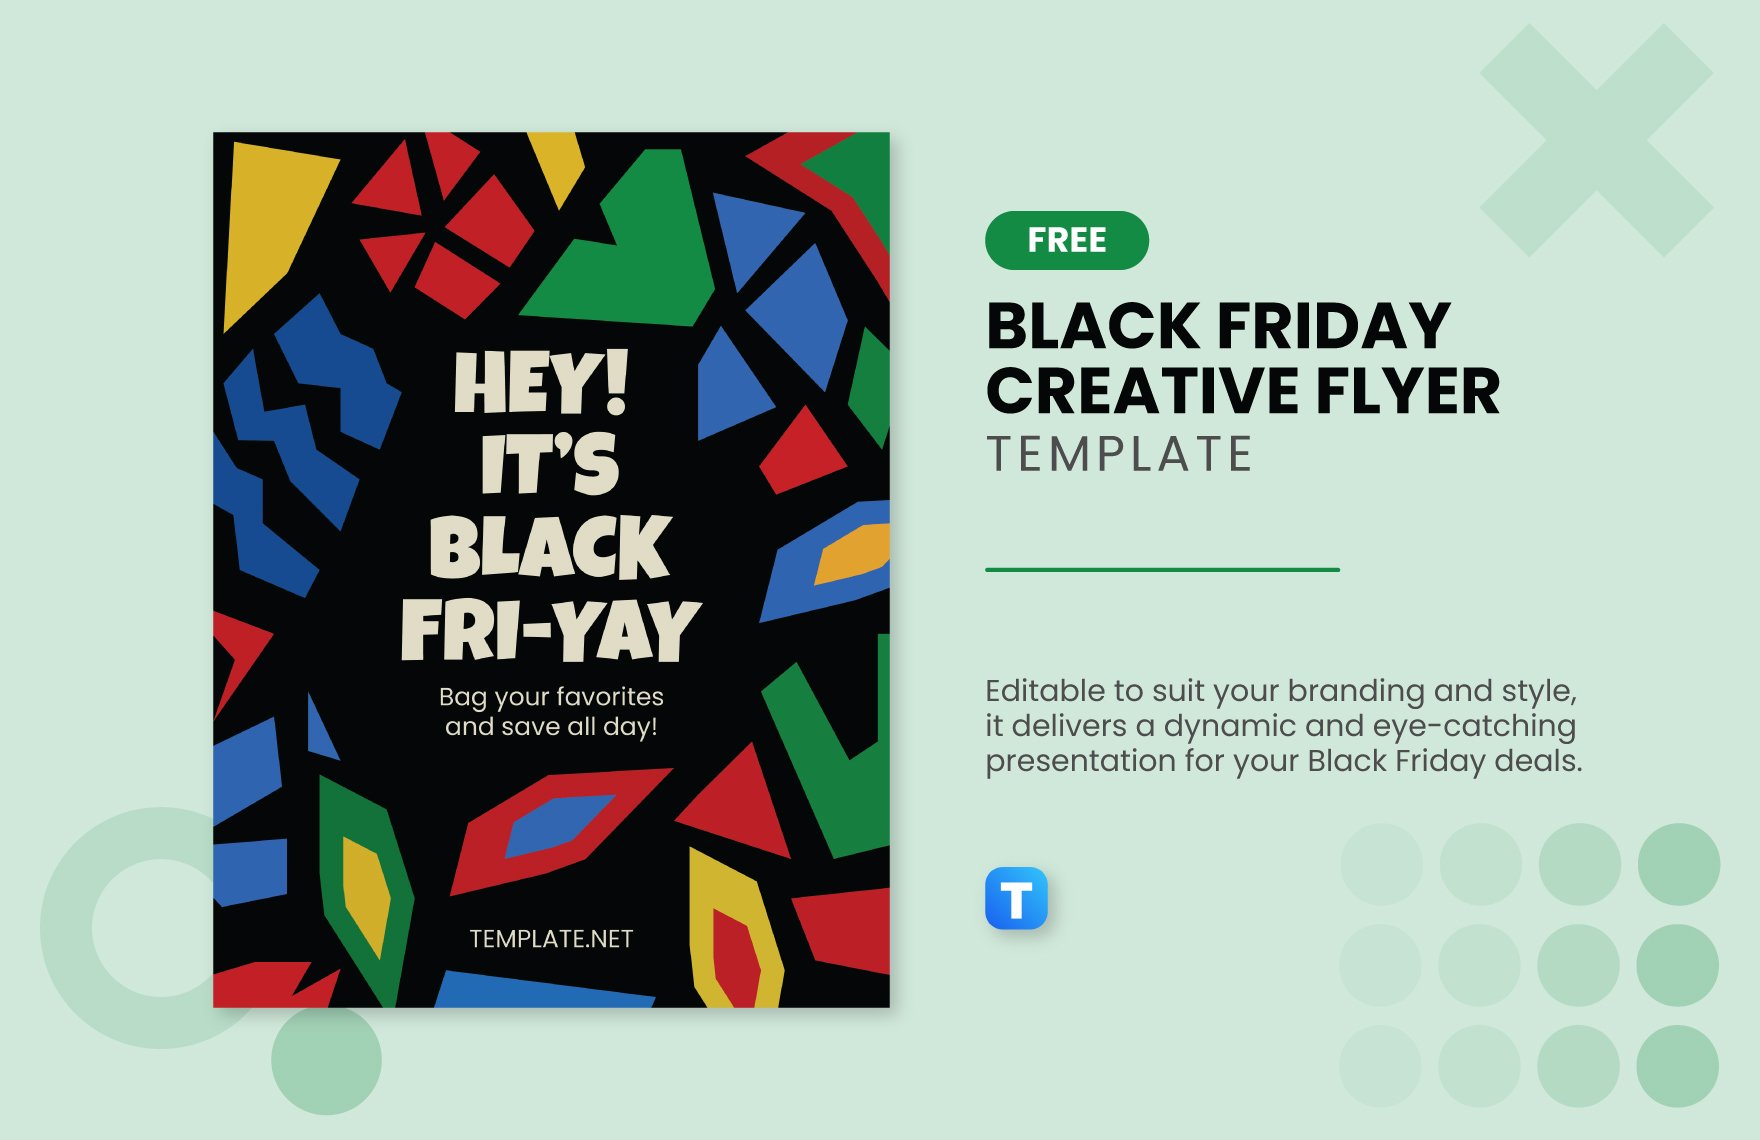 Free Black Friday Creative Flyer Template